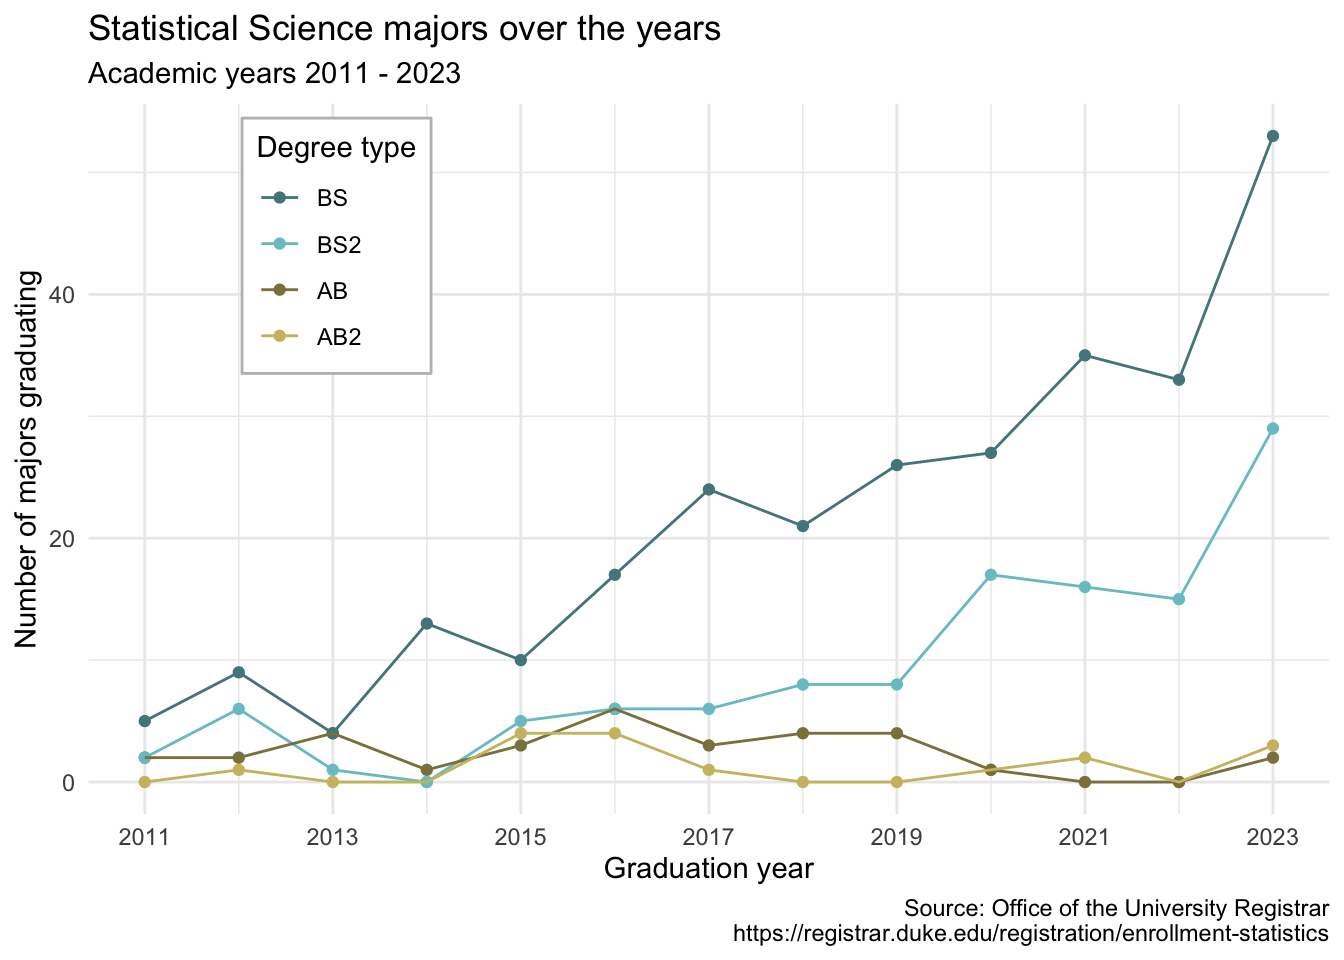 Line plot of numbers of Statistical Science majors over the years (2011 - 2021). Degree types represented are BS, BS2, AB, AB2. There is an increasing trend in BS degrees and somewhat steady trend in AB degrees.